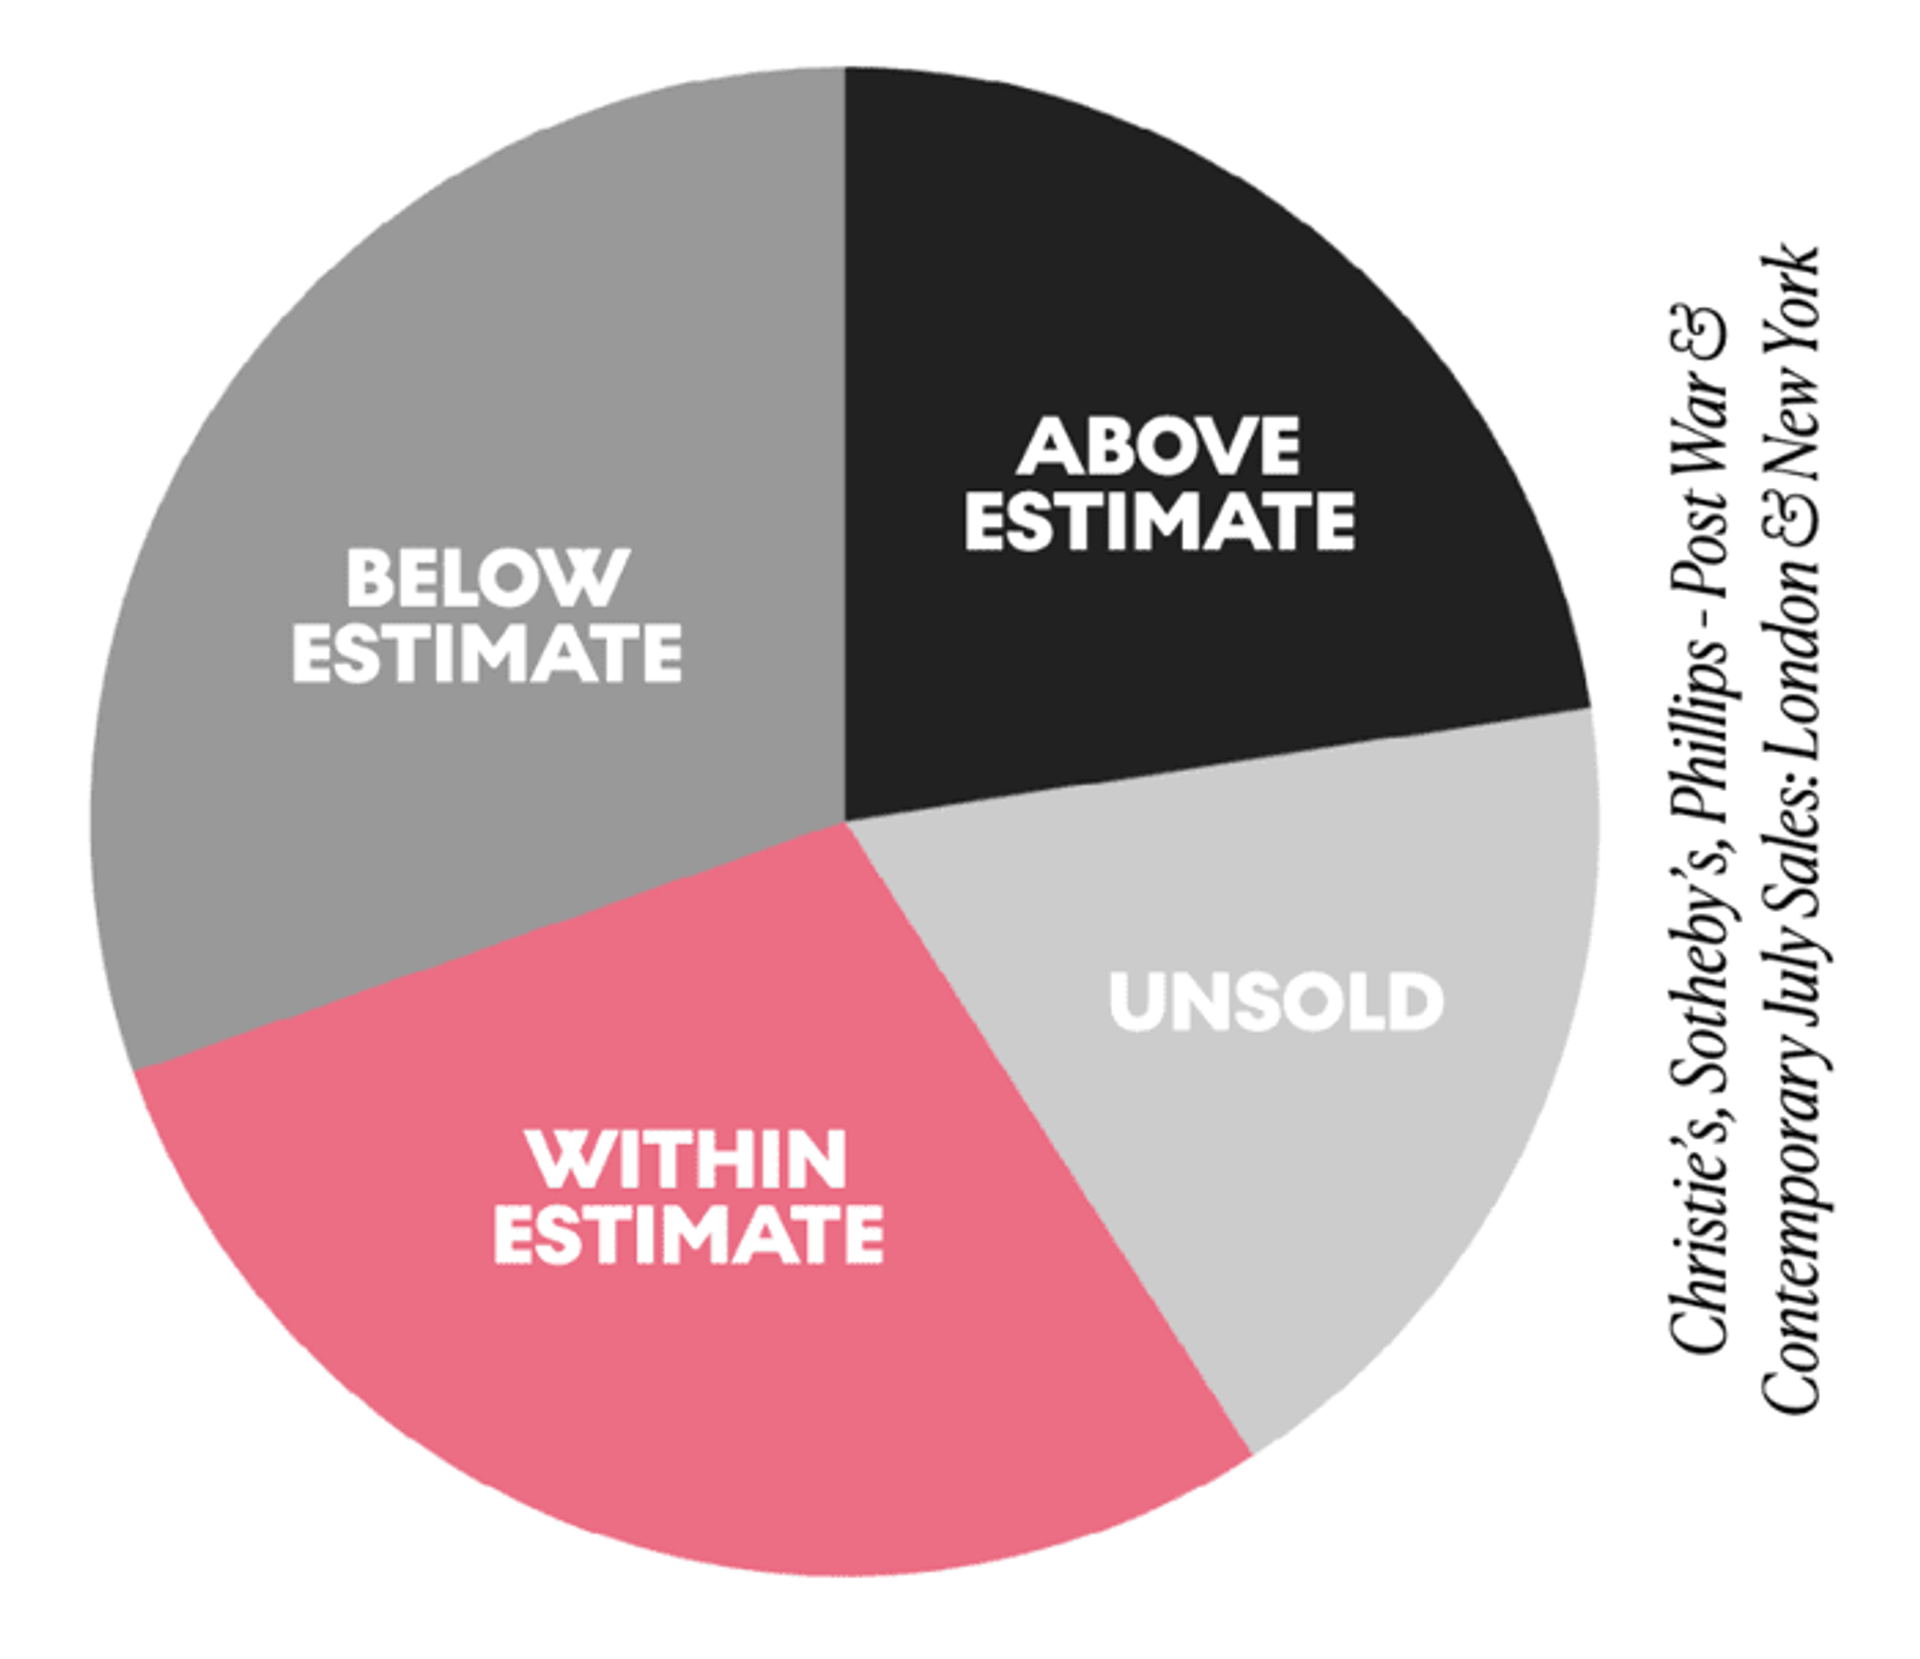 A pie chart representing July auction sales results for Post-War and Contemporary art at Christie's, Sotheby's, and Phillips auction houses in London and New York, categorising the results as below, within, above, or unsold.